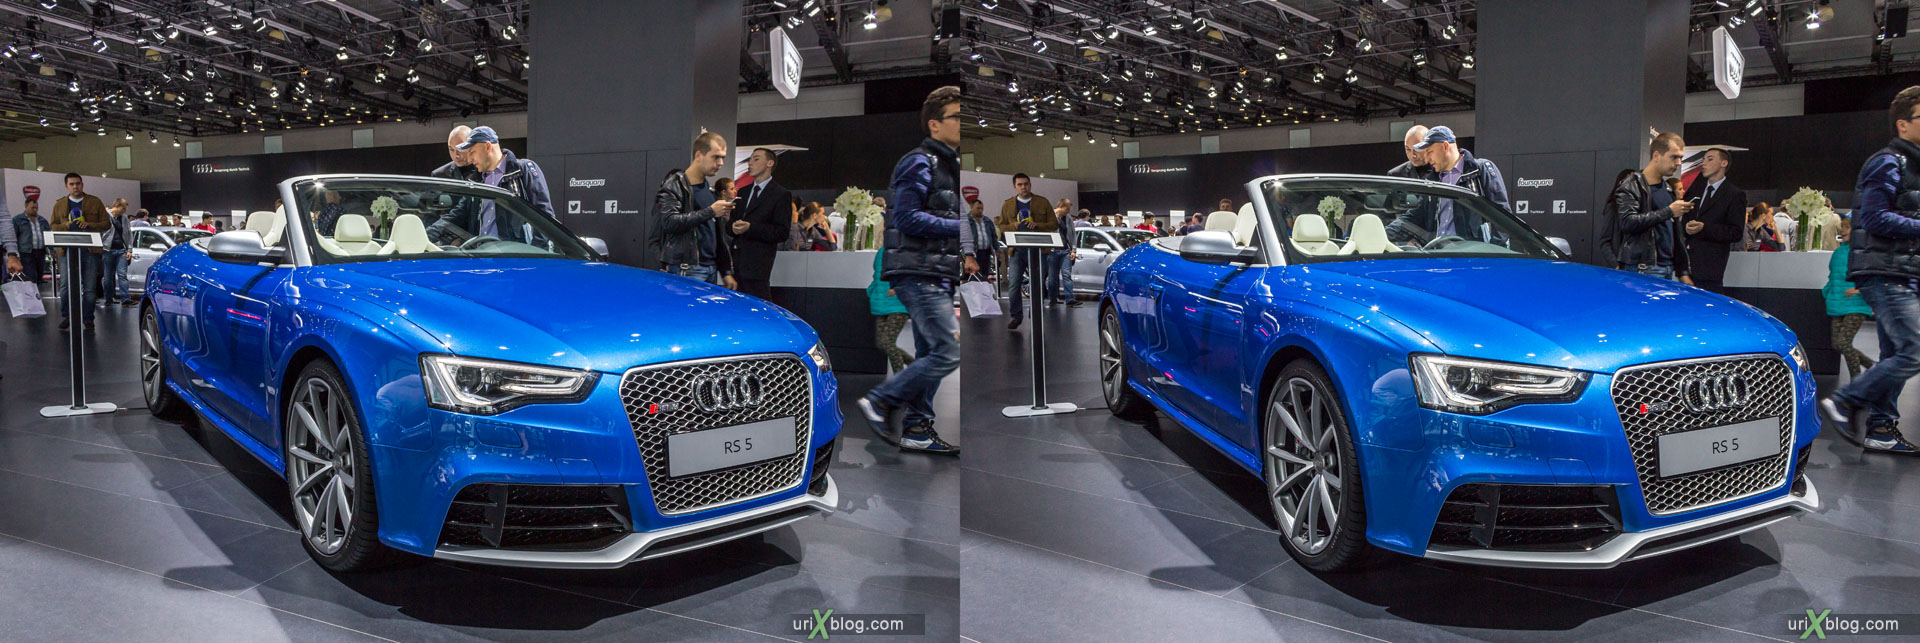 Audi RS 5, Moscow International Automobile Salon 2014, MIAS 2014, girls, models, Crocus Expo, Moscow, Russia, 3D, stereo pair, cross-eyed, crossview, cross view stereo pair, stereoscopic, 2014